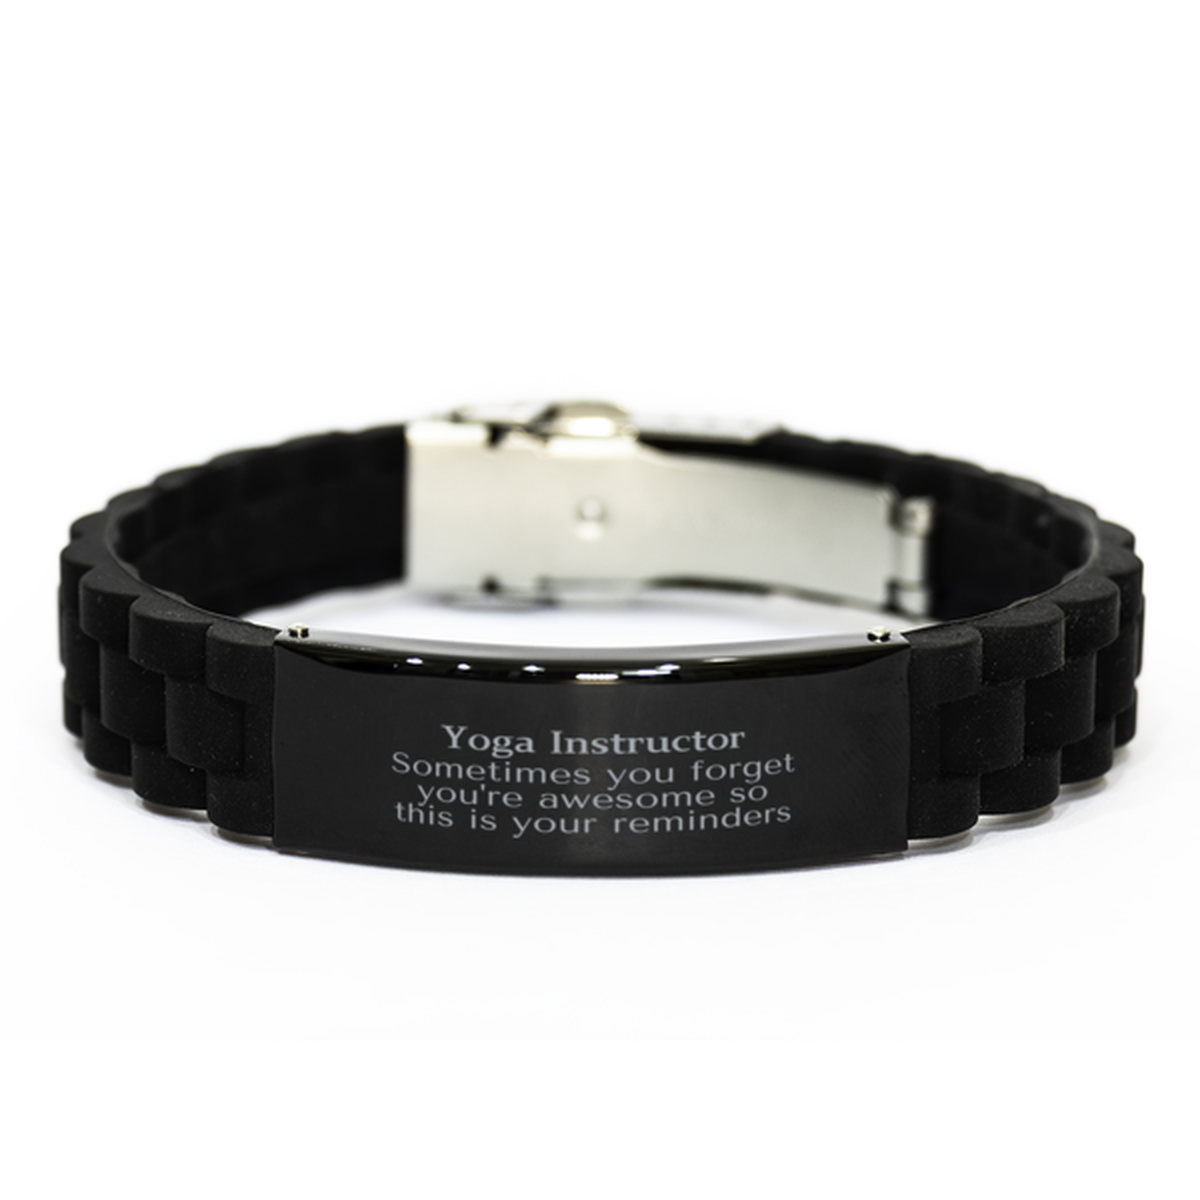 Sentimental Yoga Instructor Black Glidelock Clasp Bracelet, Yoga Instructor Sometimes you forget you're awesome so this is your reminders, Graduation Christmas Birthday Gifts for Yoga Instructor, Men, Women, Coworkers